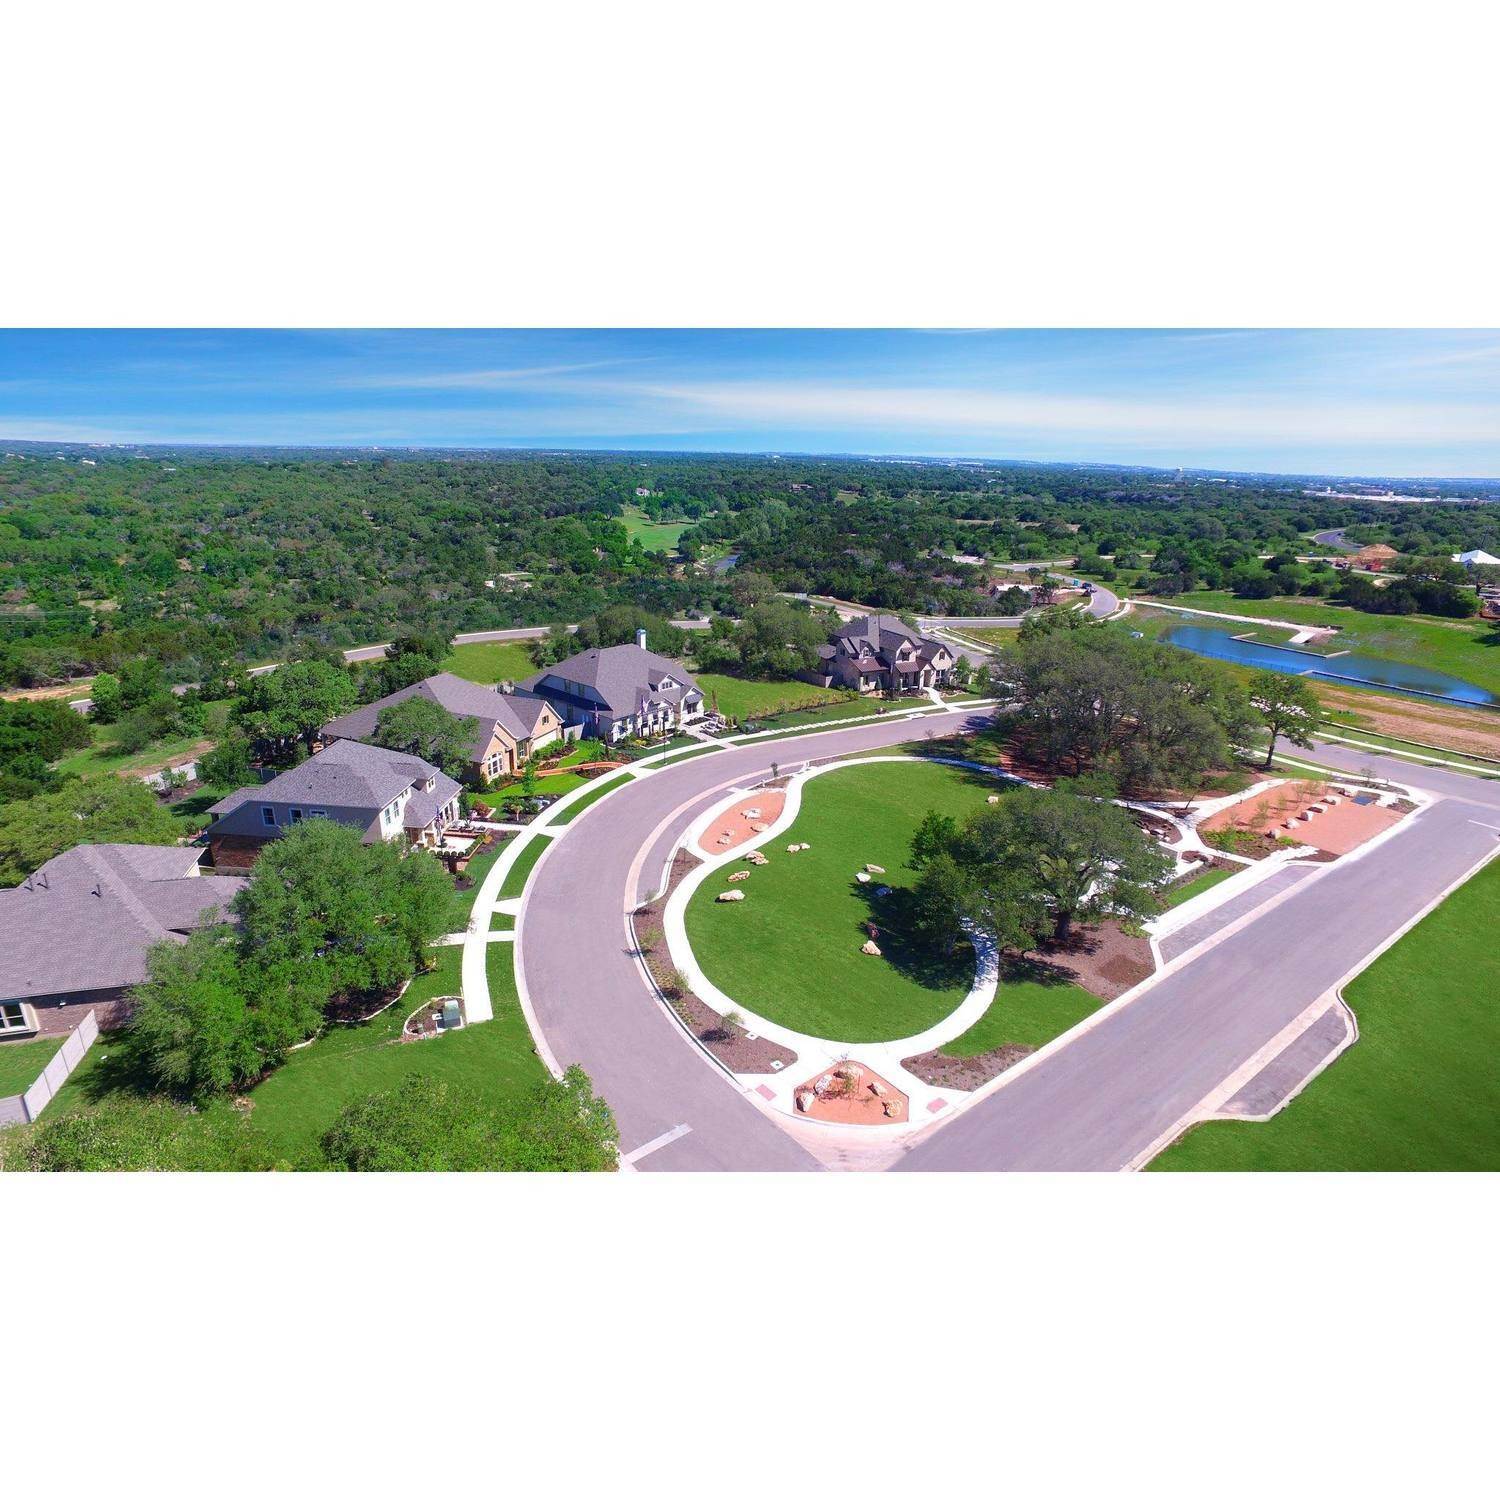 17. Wolf Ranch 51' xây dựng tại 109 Blackberry Cove, Georgetown, TX 78633